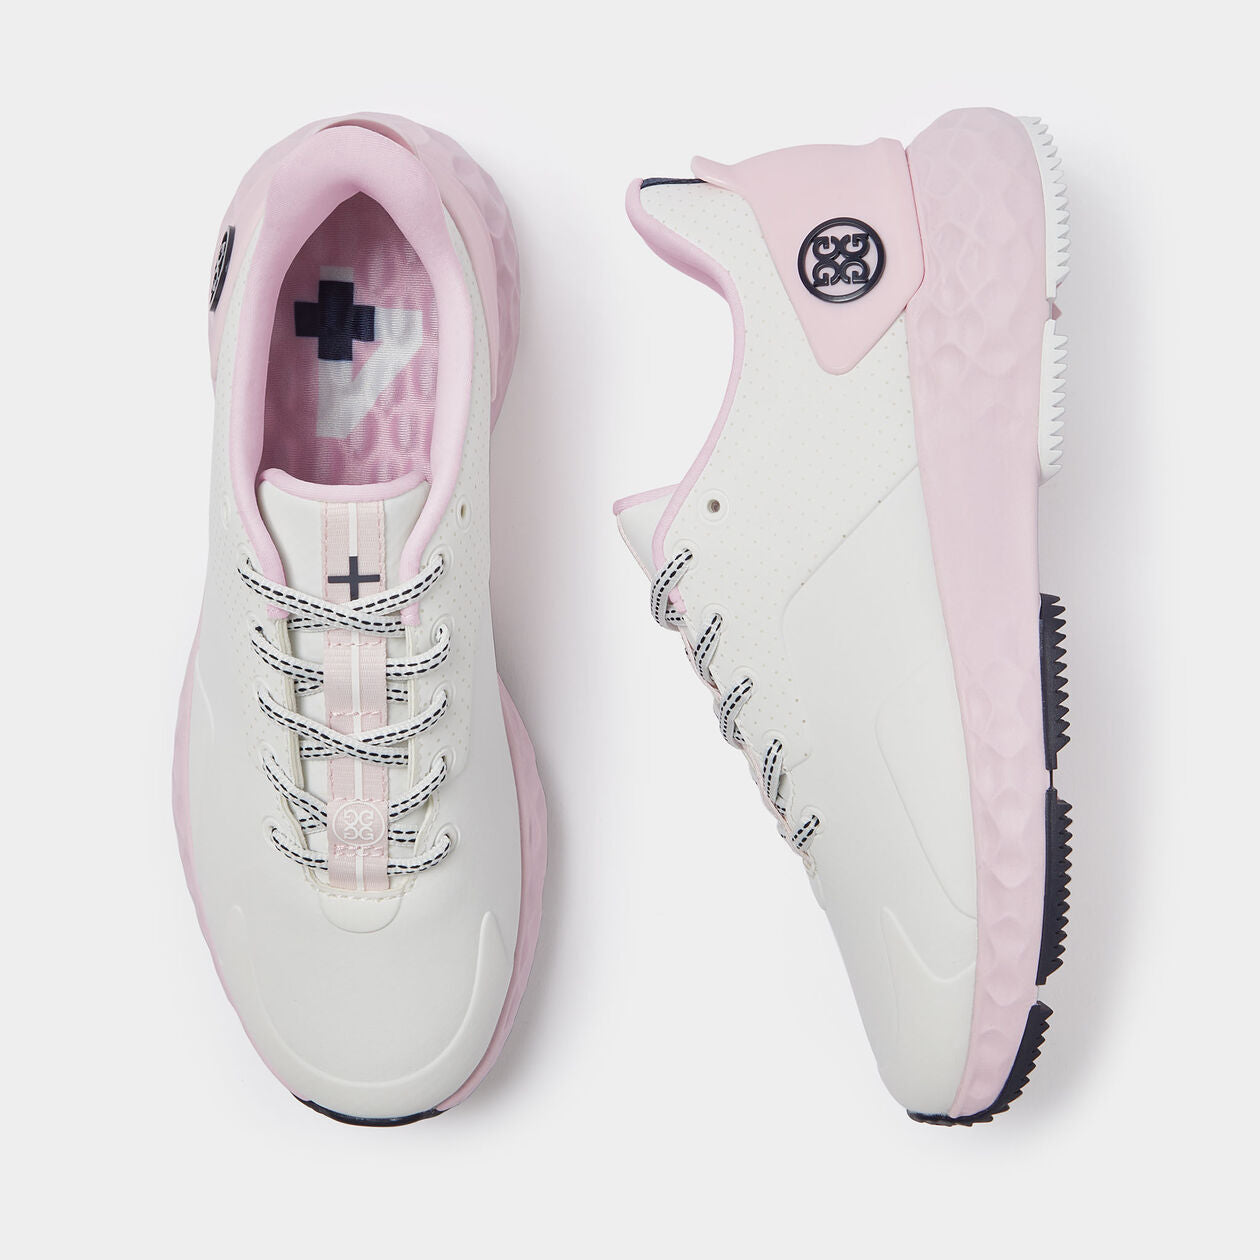 G/FORE Women's MG4+ Perforated Golf Shoe